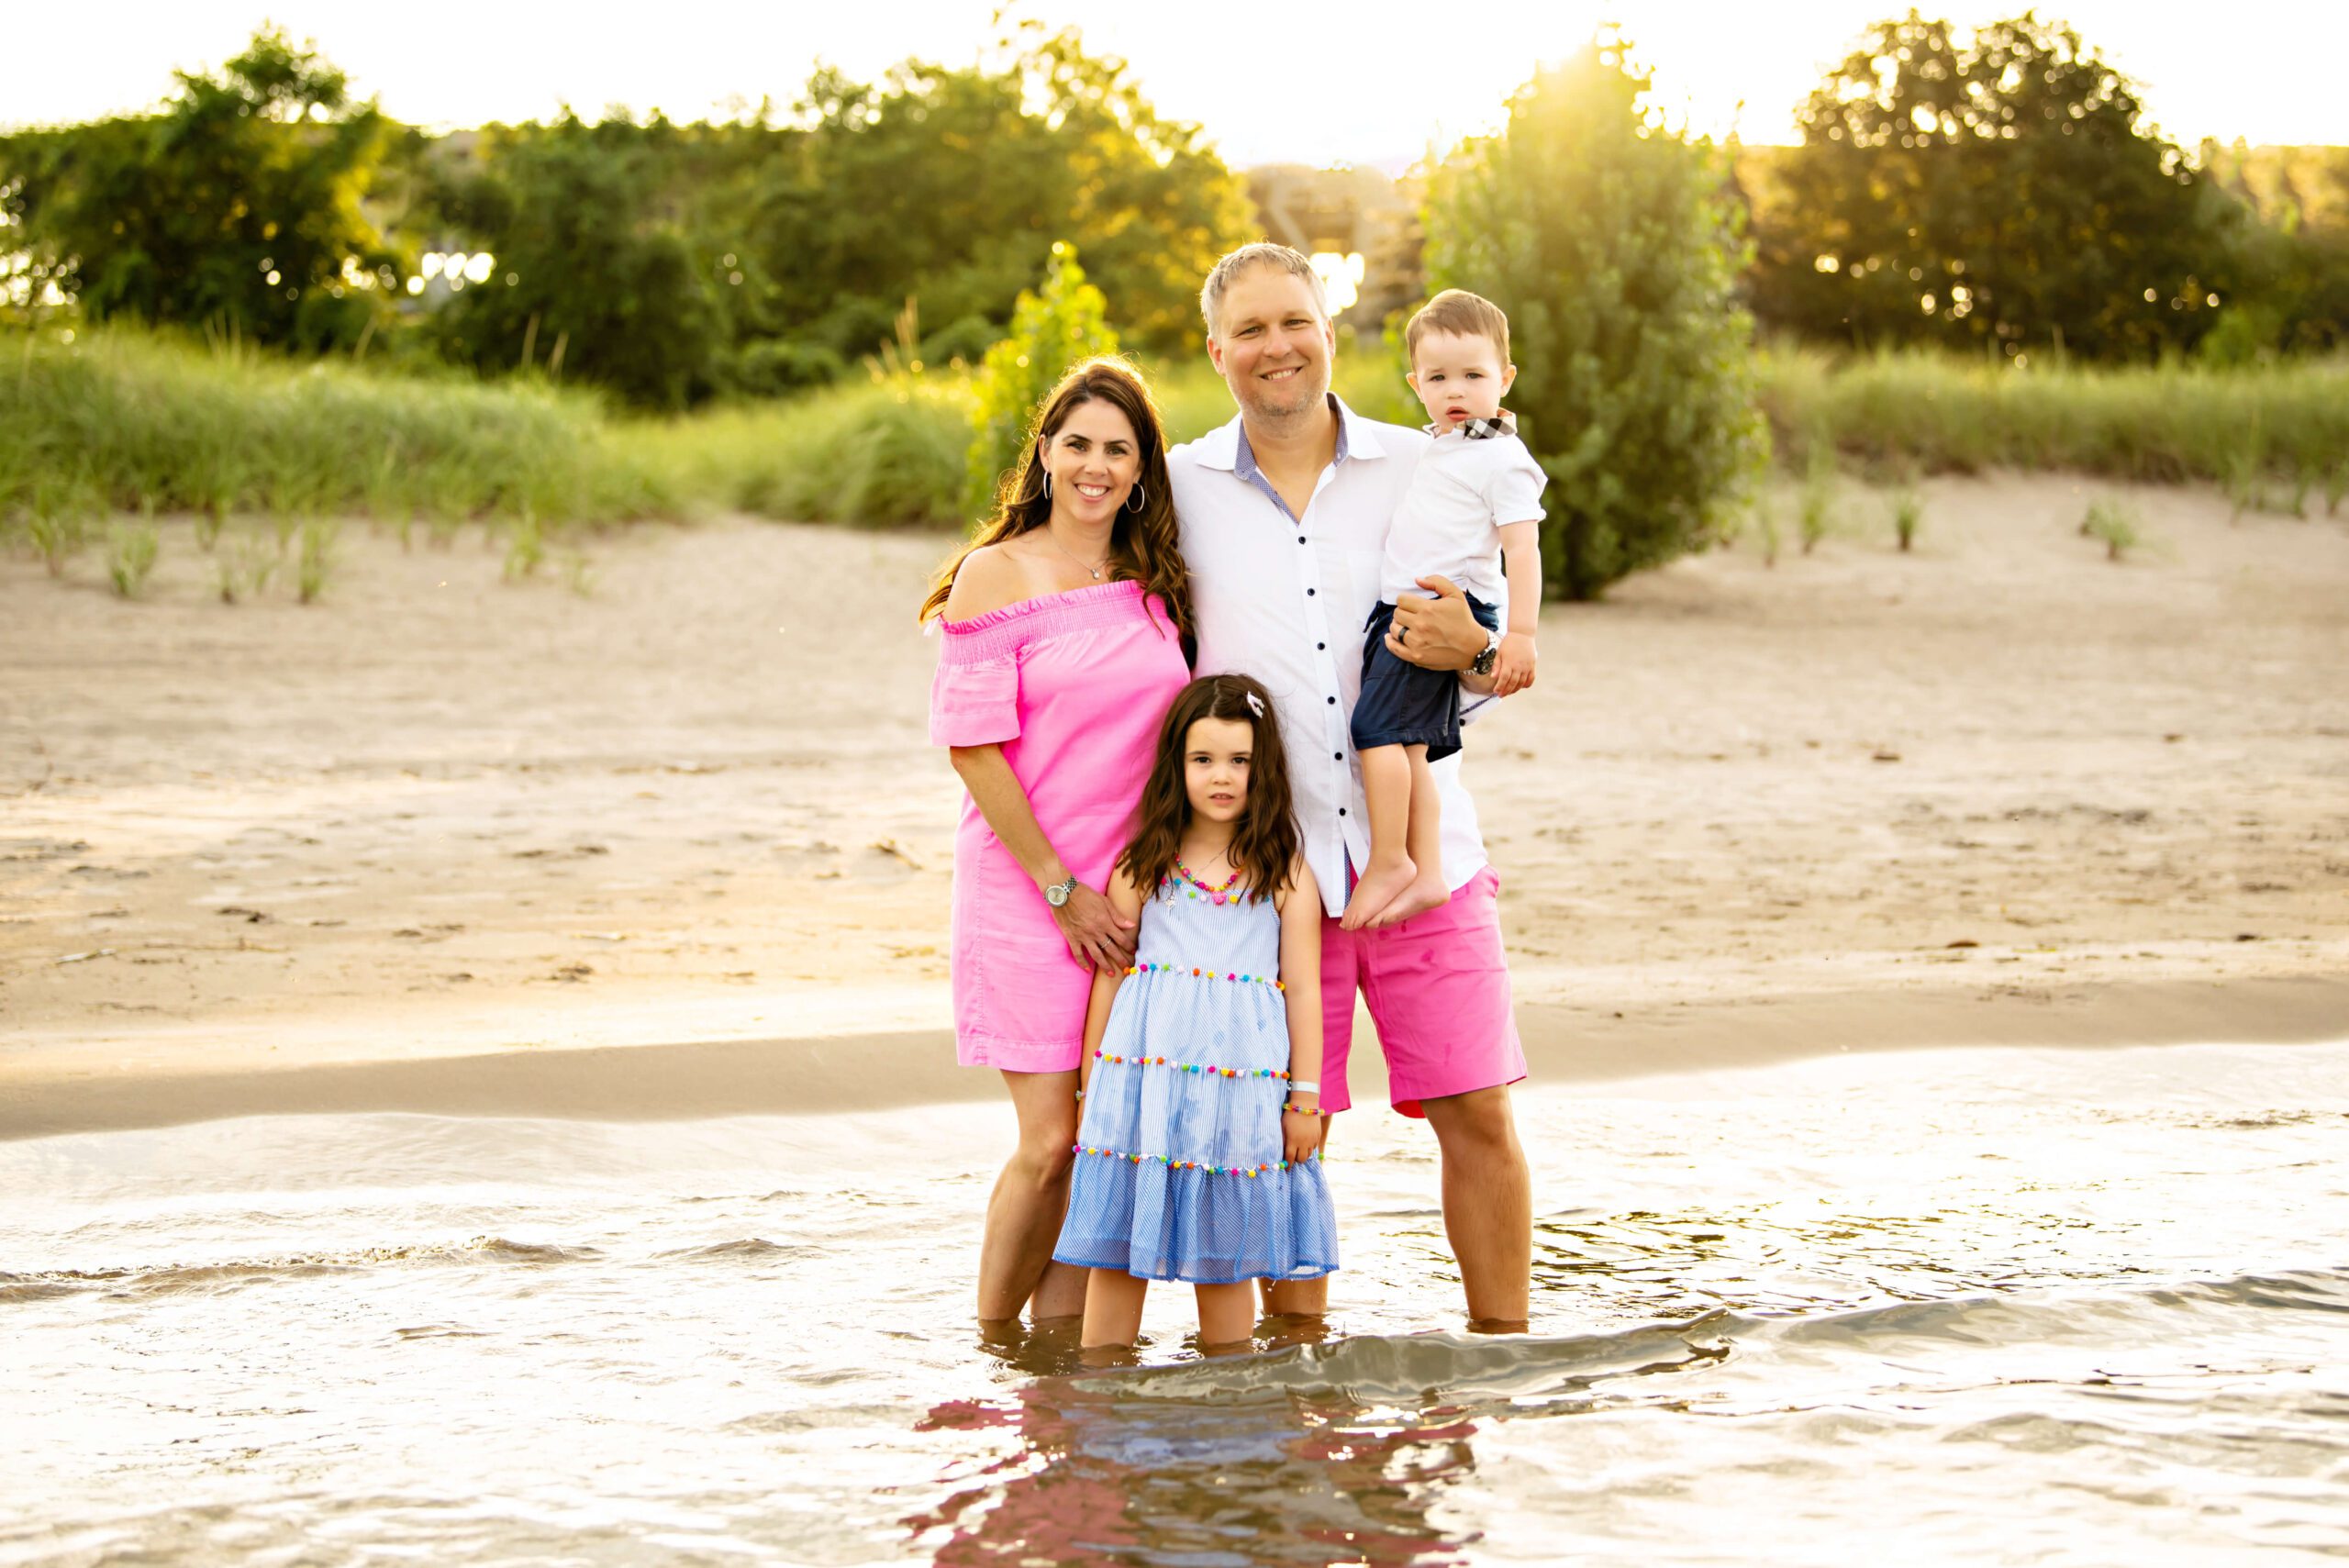 Outdoor beach with a family of four at the golden hour